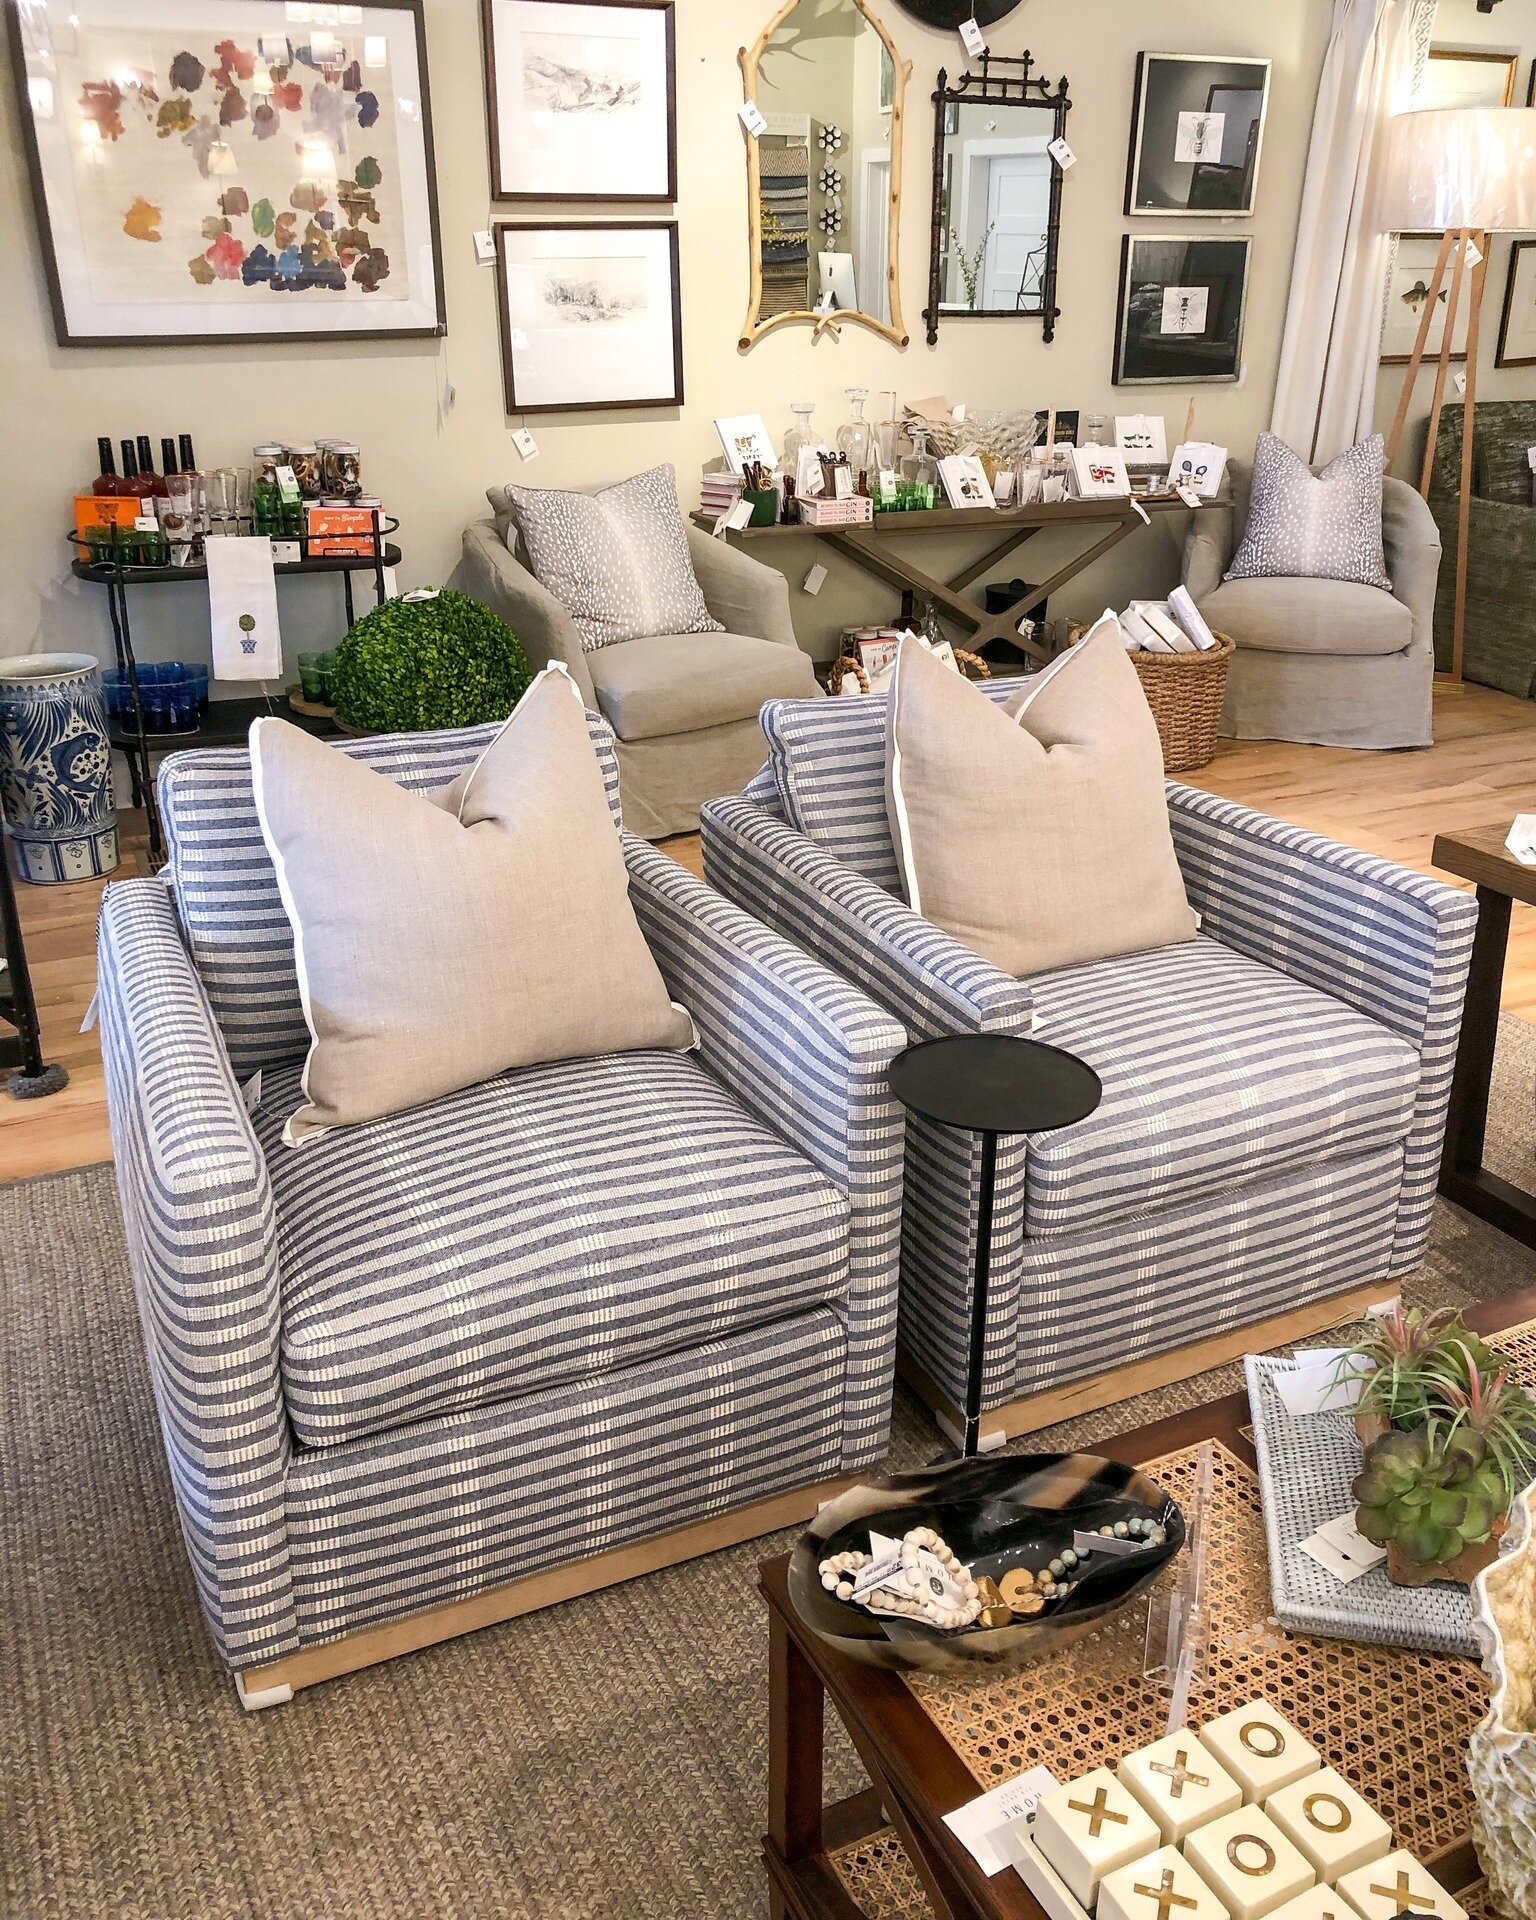 Have you been in the store recently? We've added some fun upholstered furniture to the showroom floor like these gorgeous blue and white chairs! These chairs are built with strong lines and understated class. With a swivel base, they're a comfortable